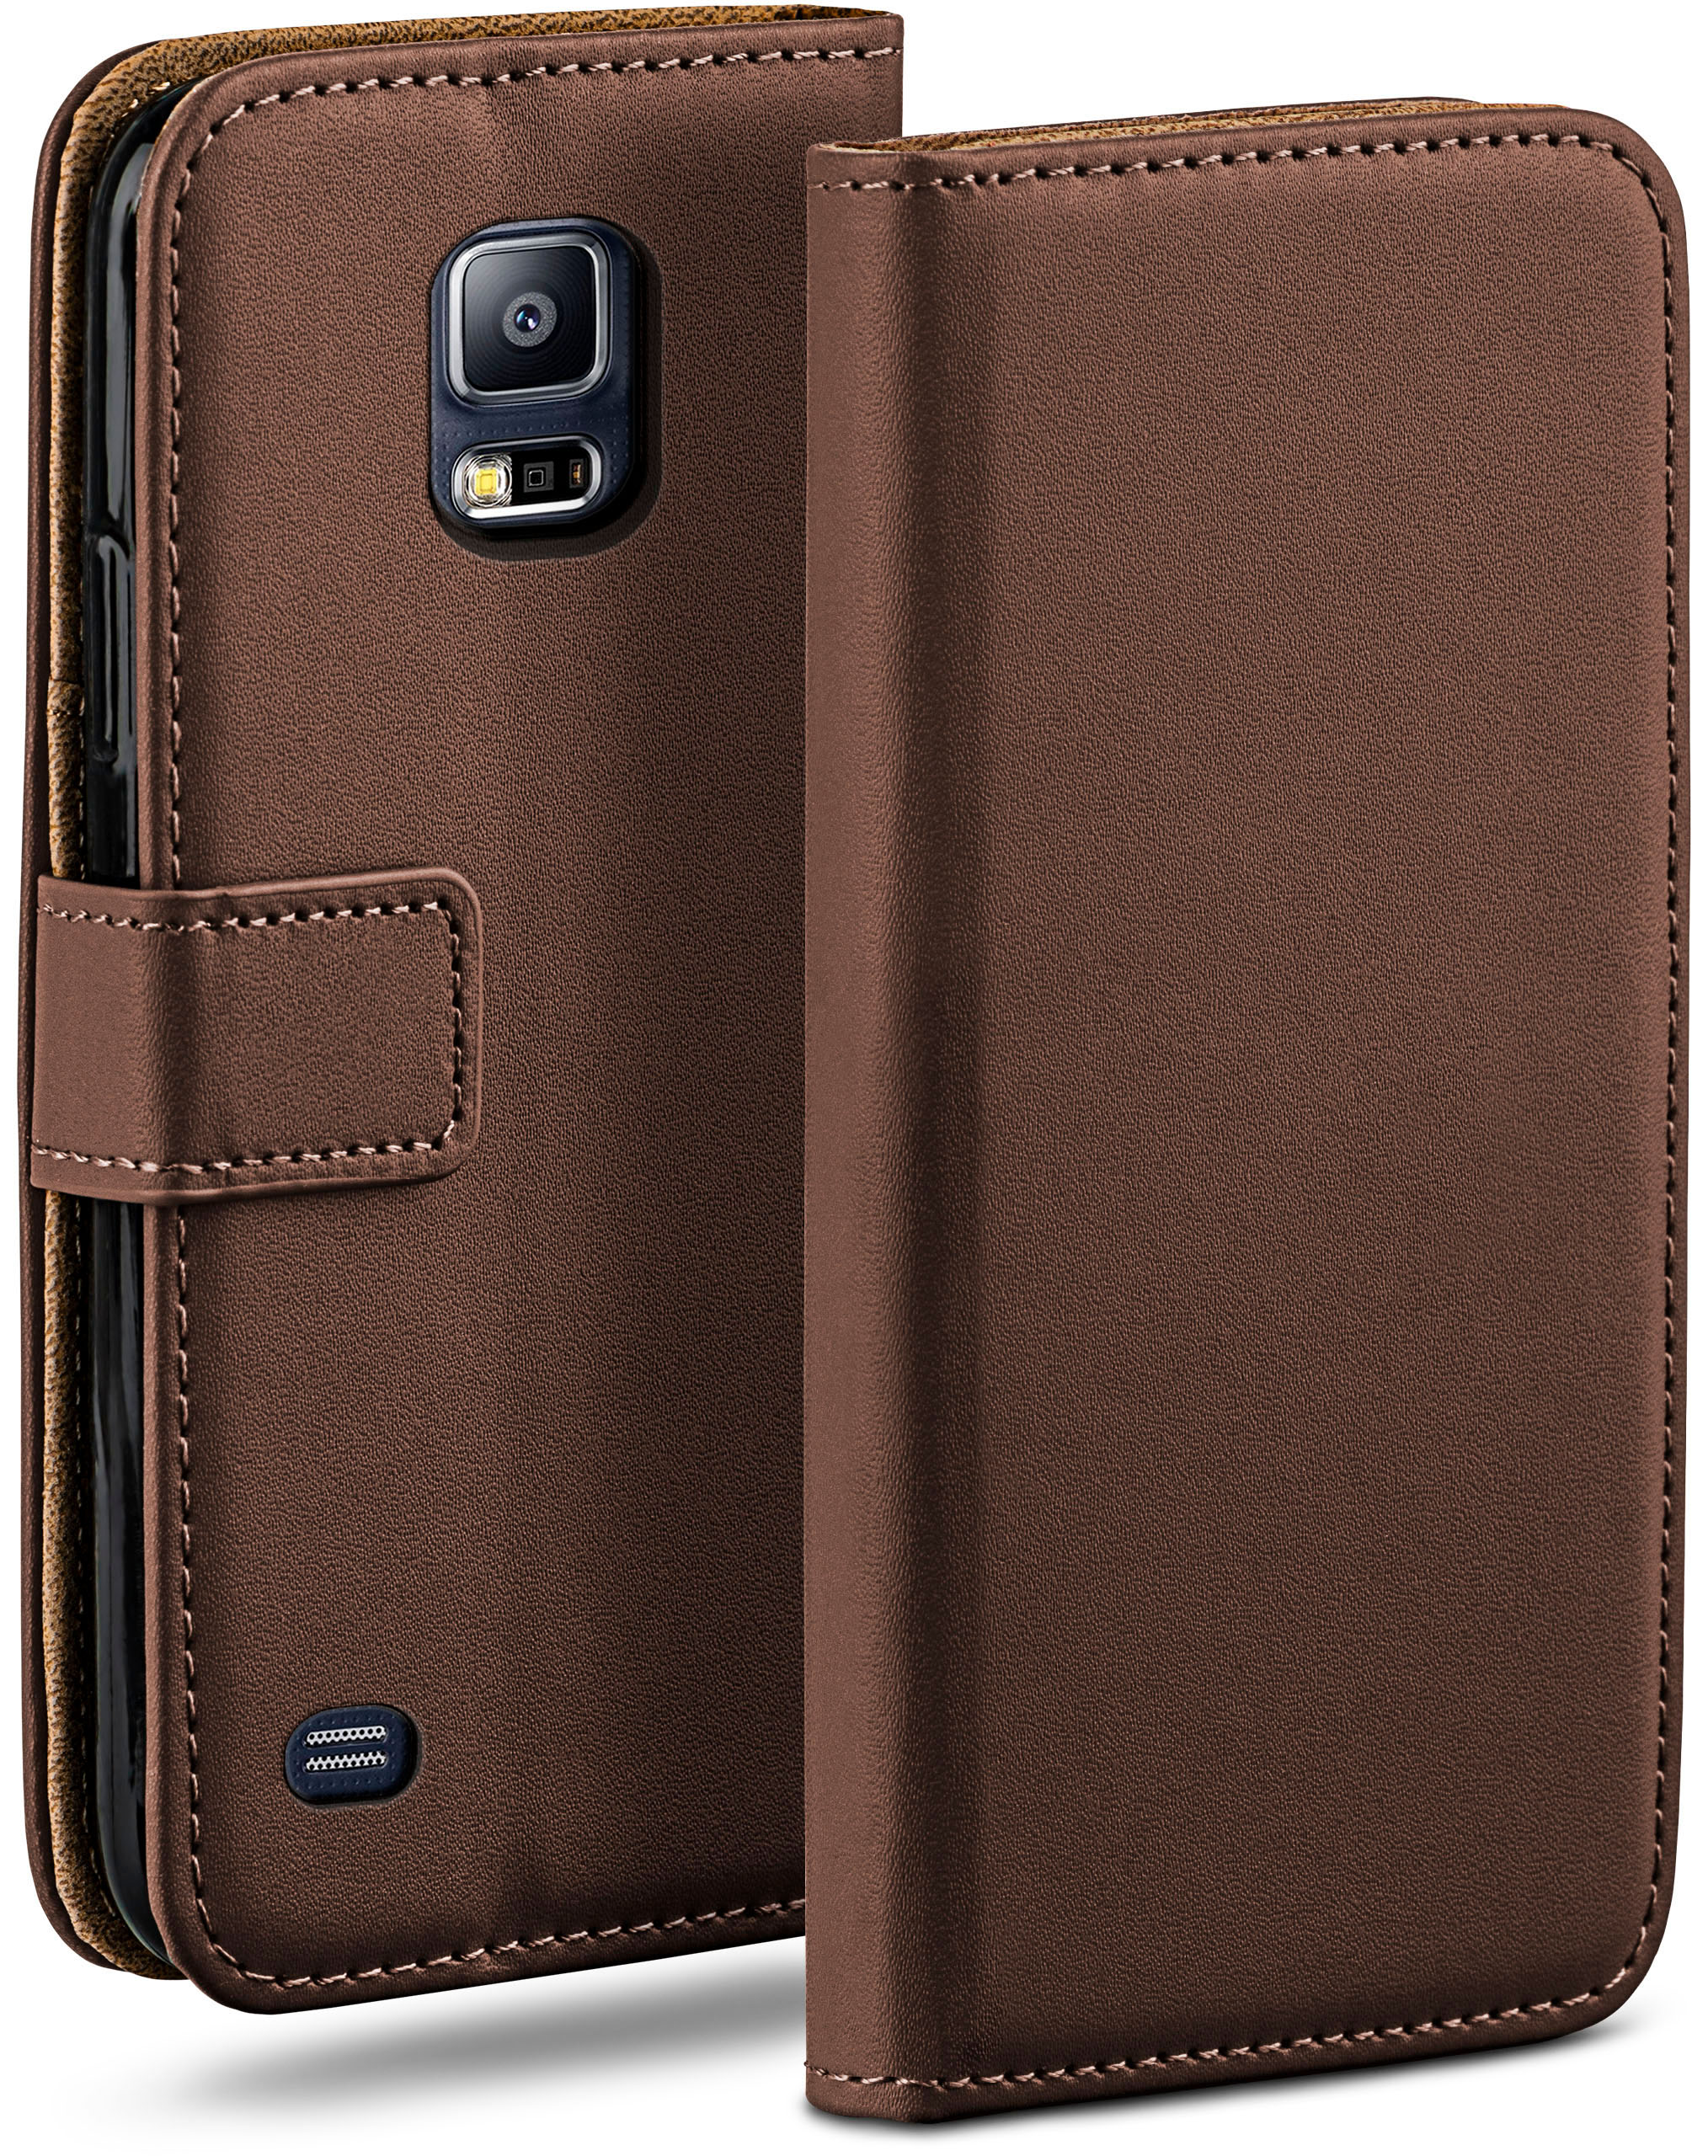 MOEX S5 Galaxy Bookcover, / Neo, Samsung, Case, Oxide-Brown Book S5